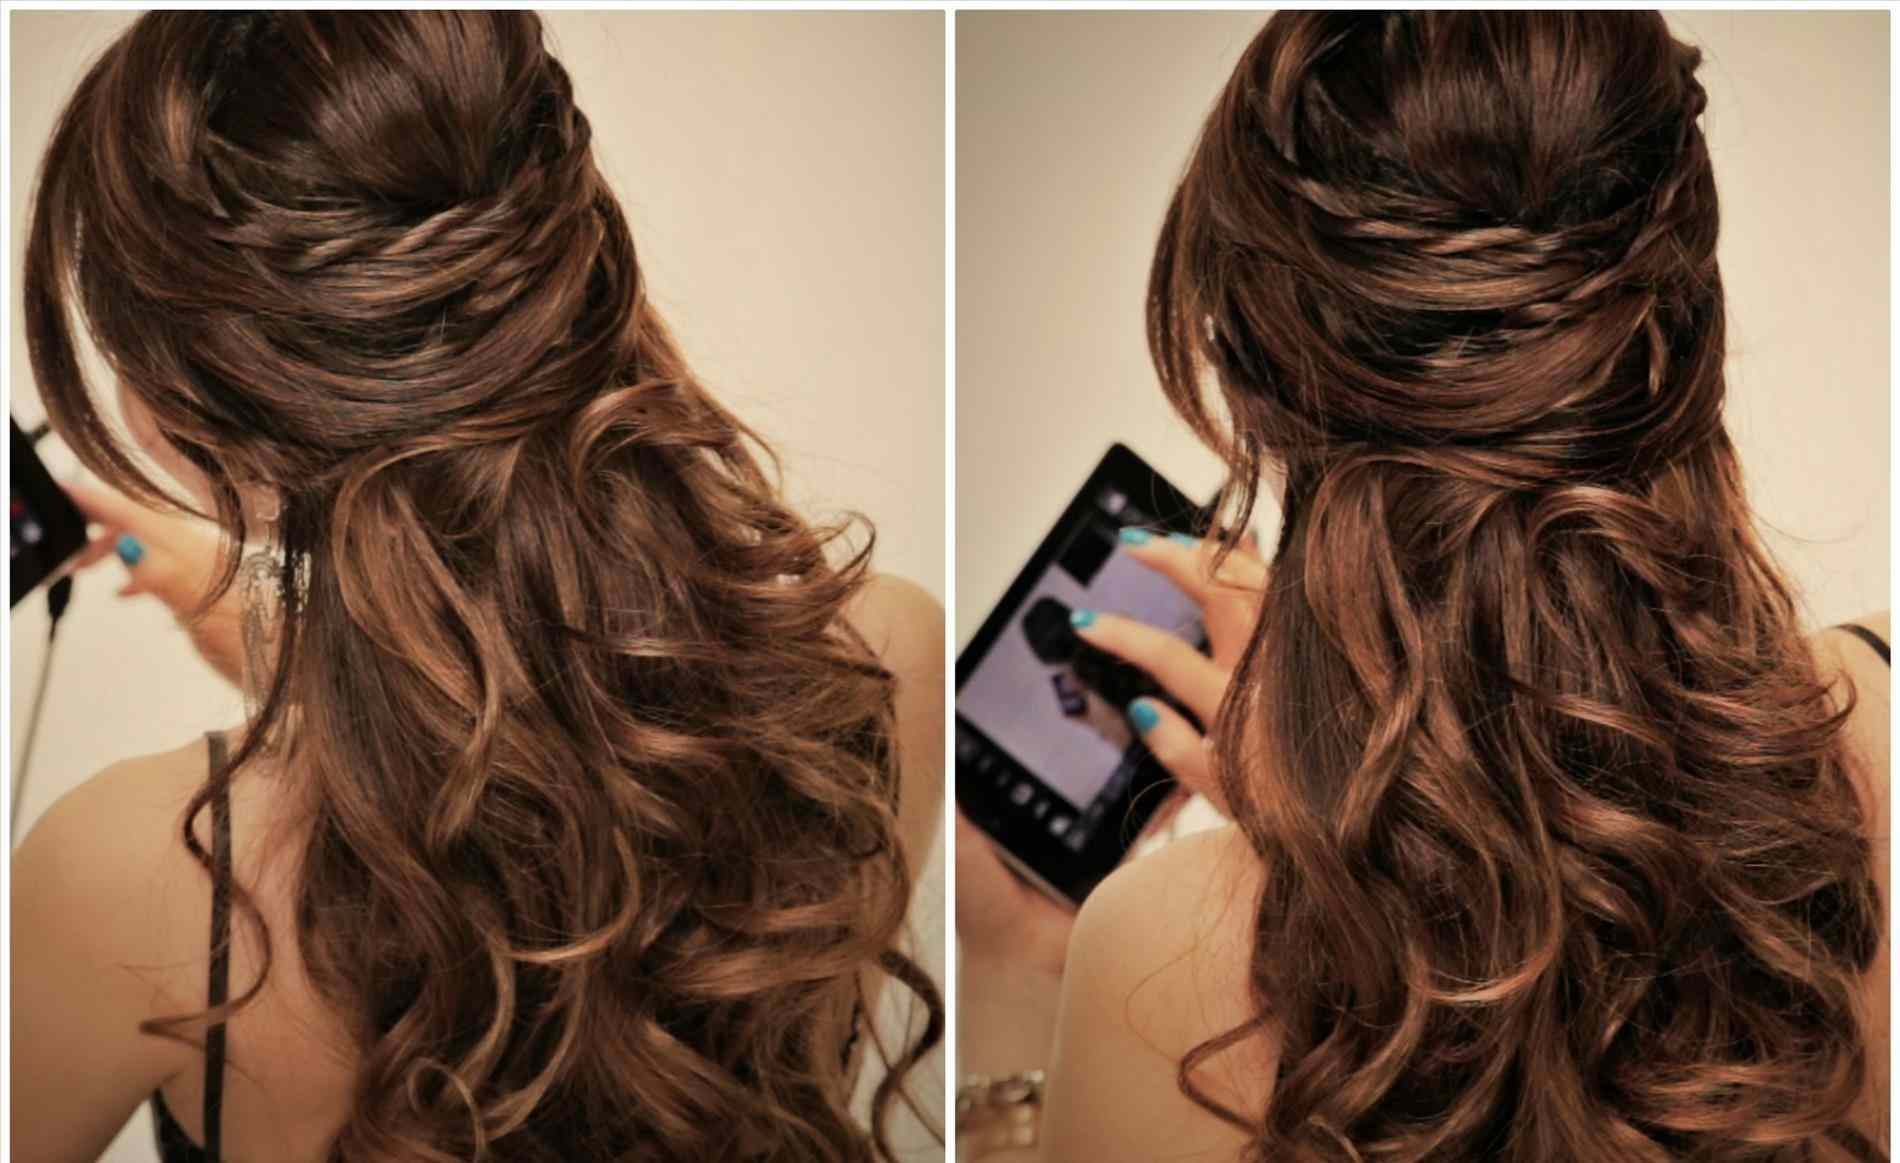 Do It Yourself Wedding Hairstyles
 Do It Yourself Wedding Hairstyles For Shoulder Length Hair